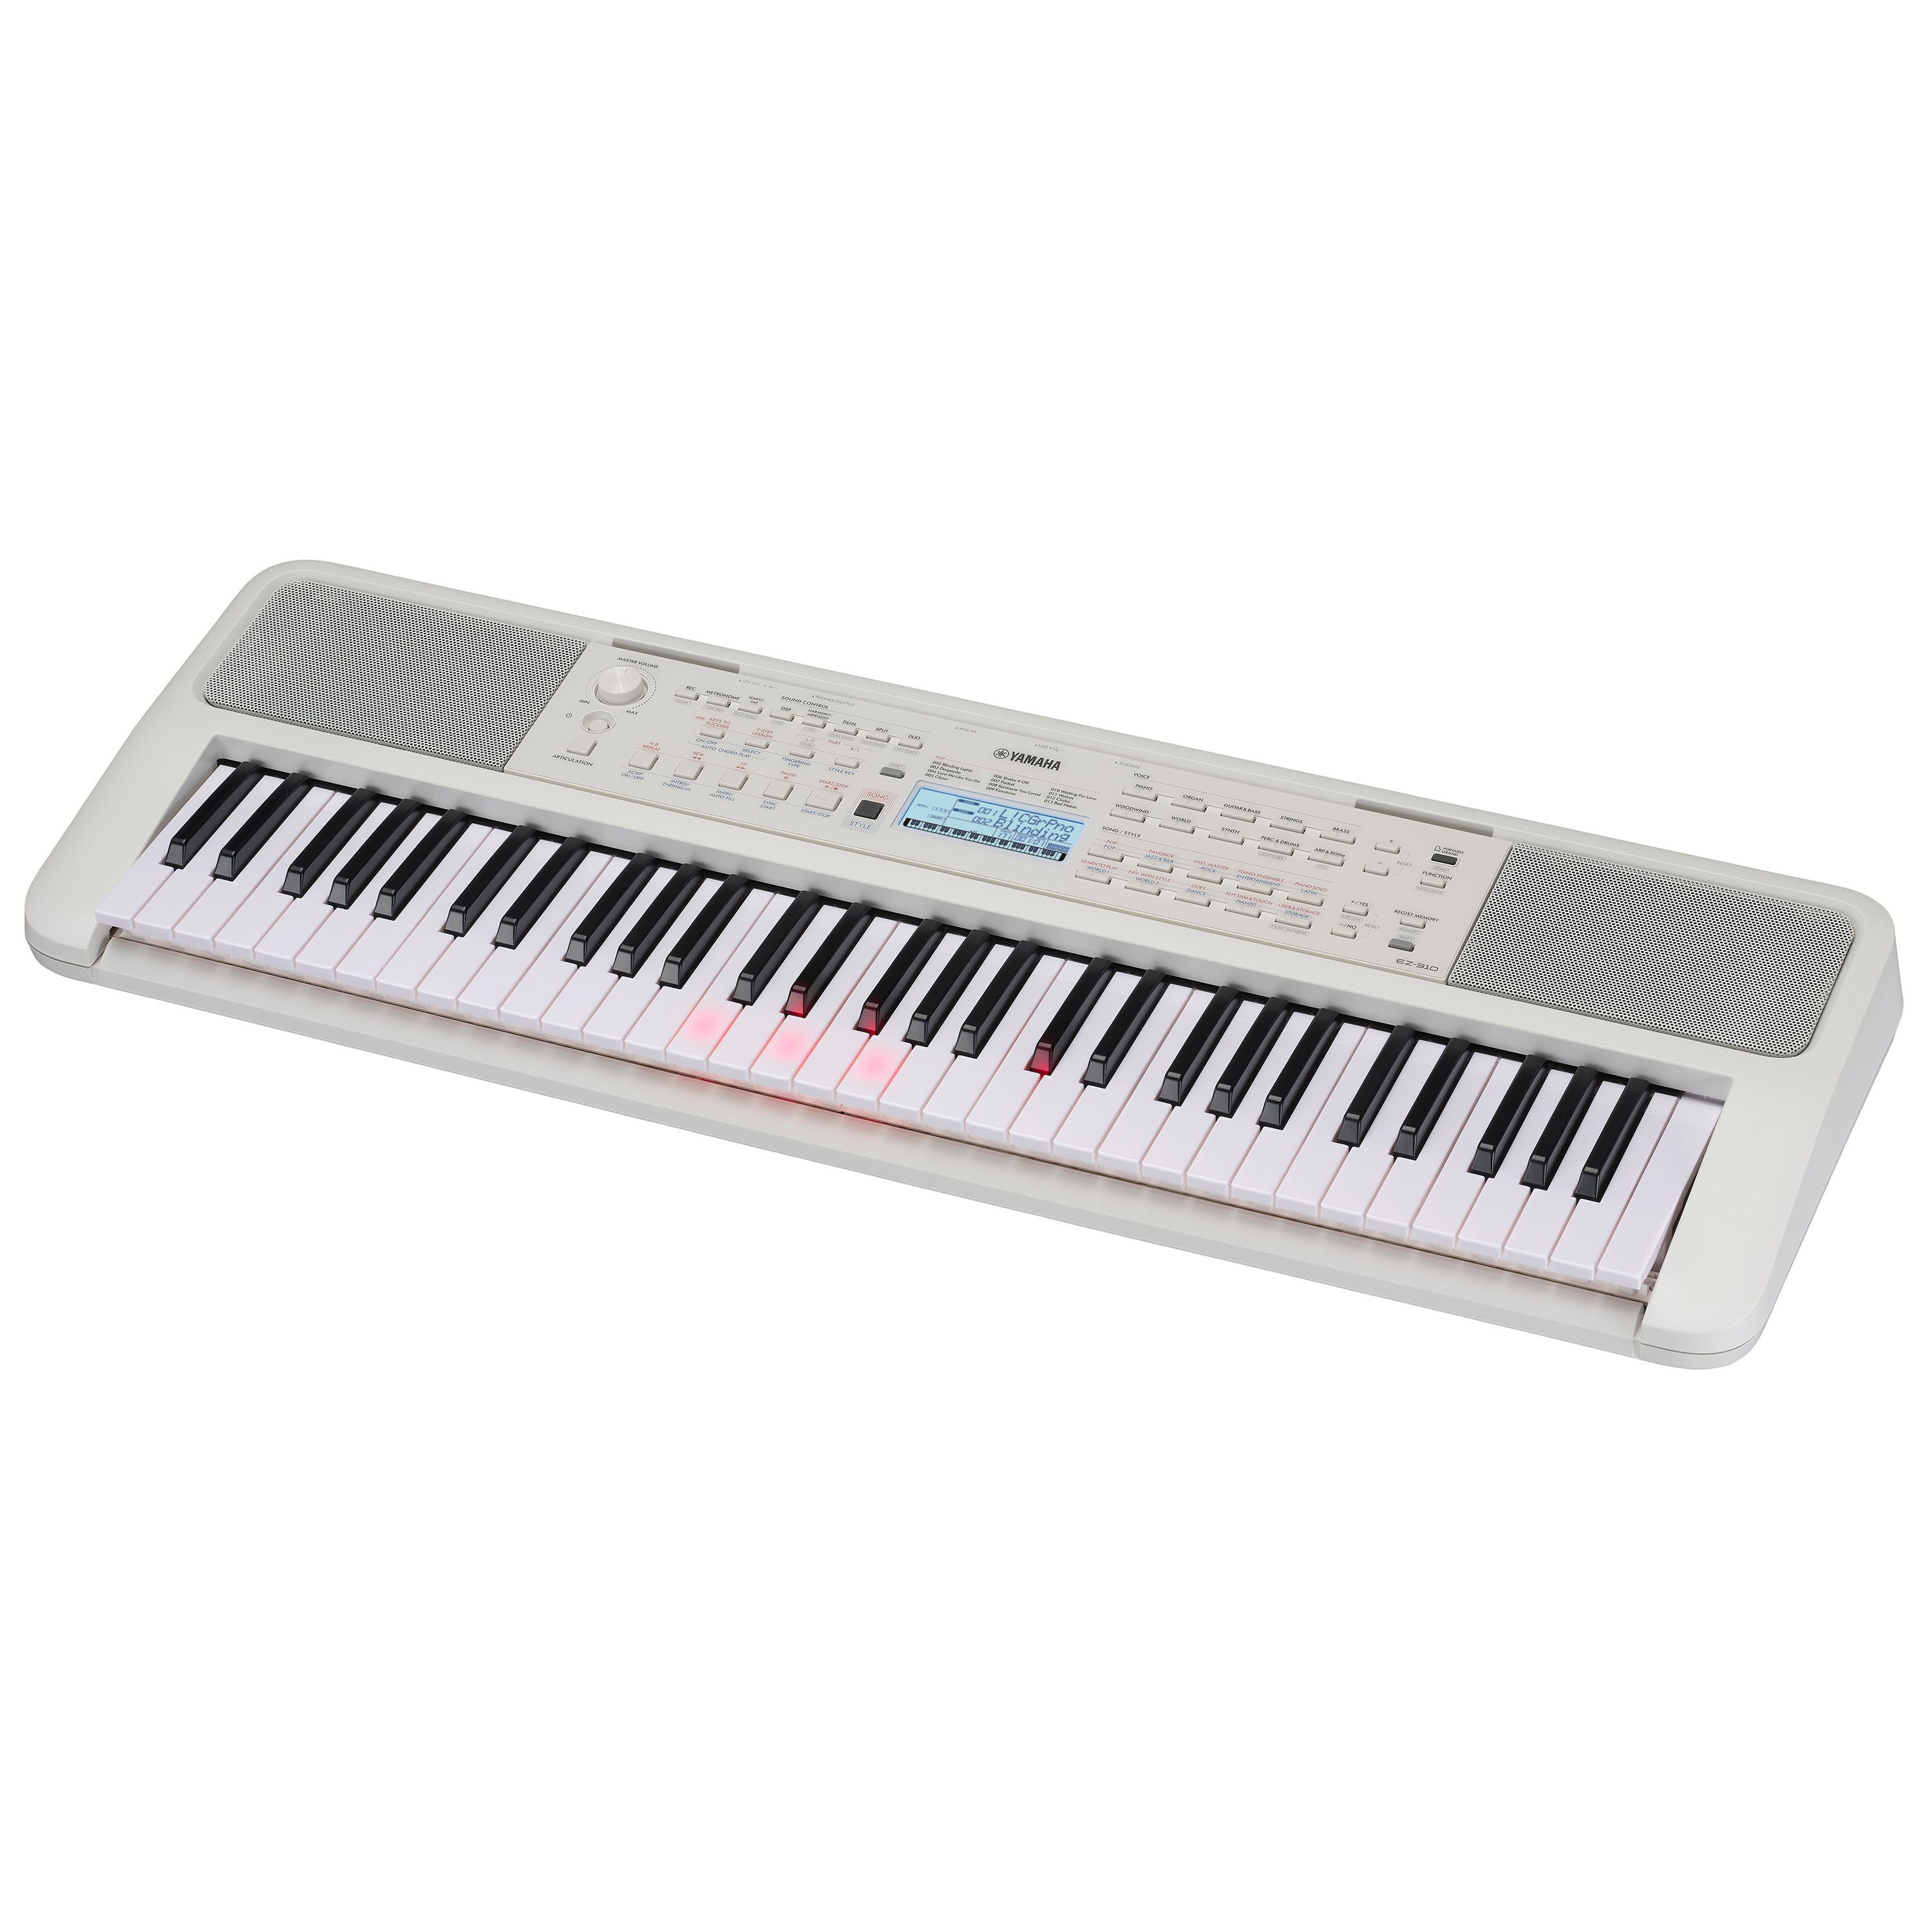 Yamaha EZ310 Portable Keyboard with Lighted Keys, View 2